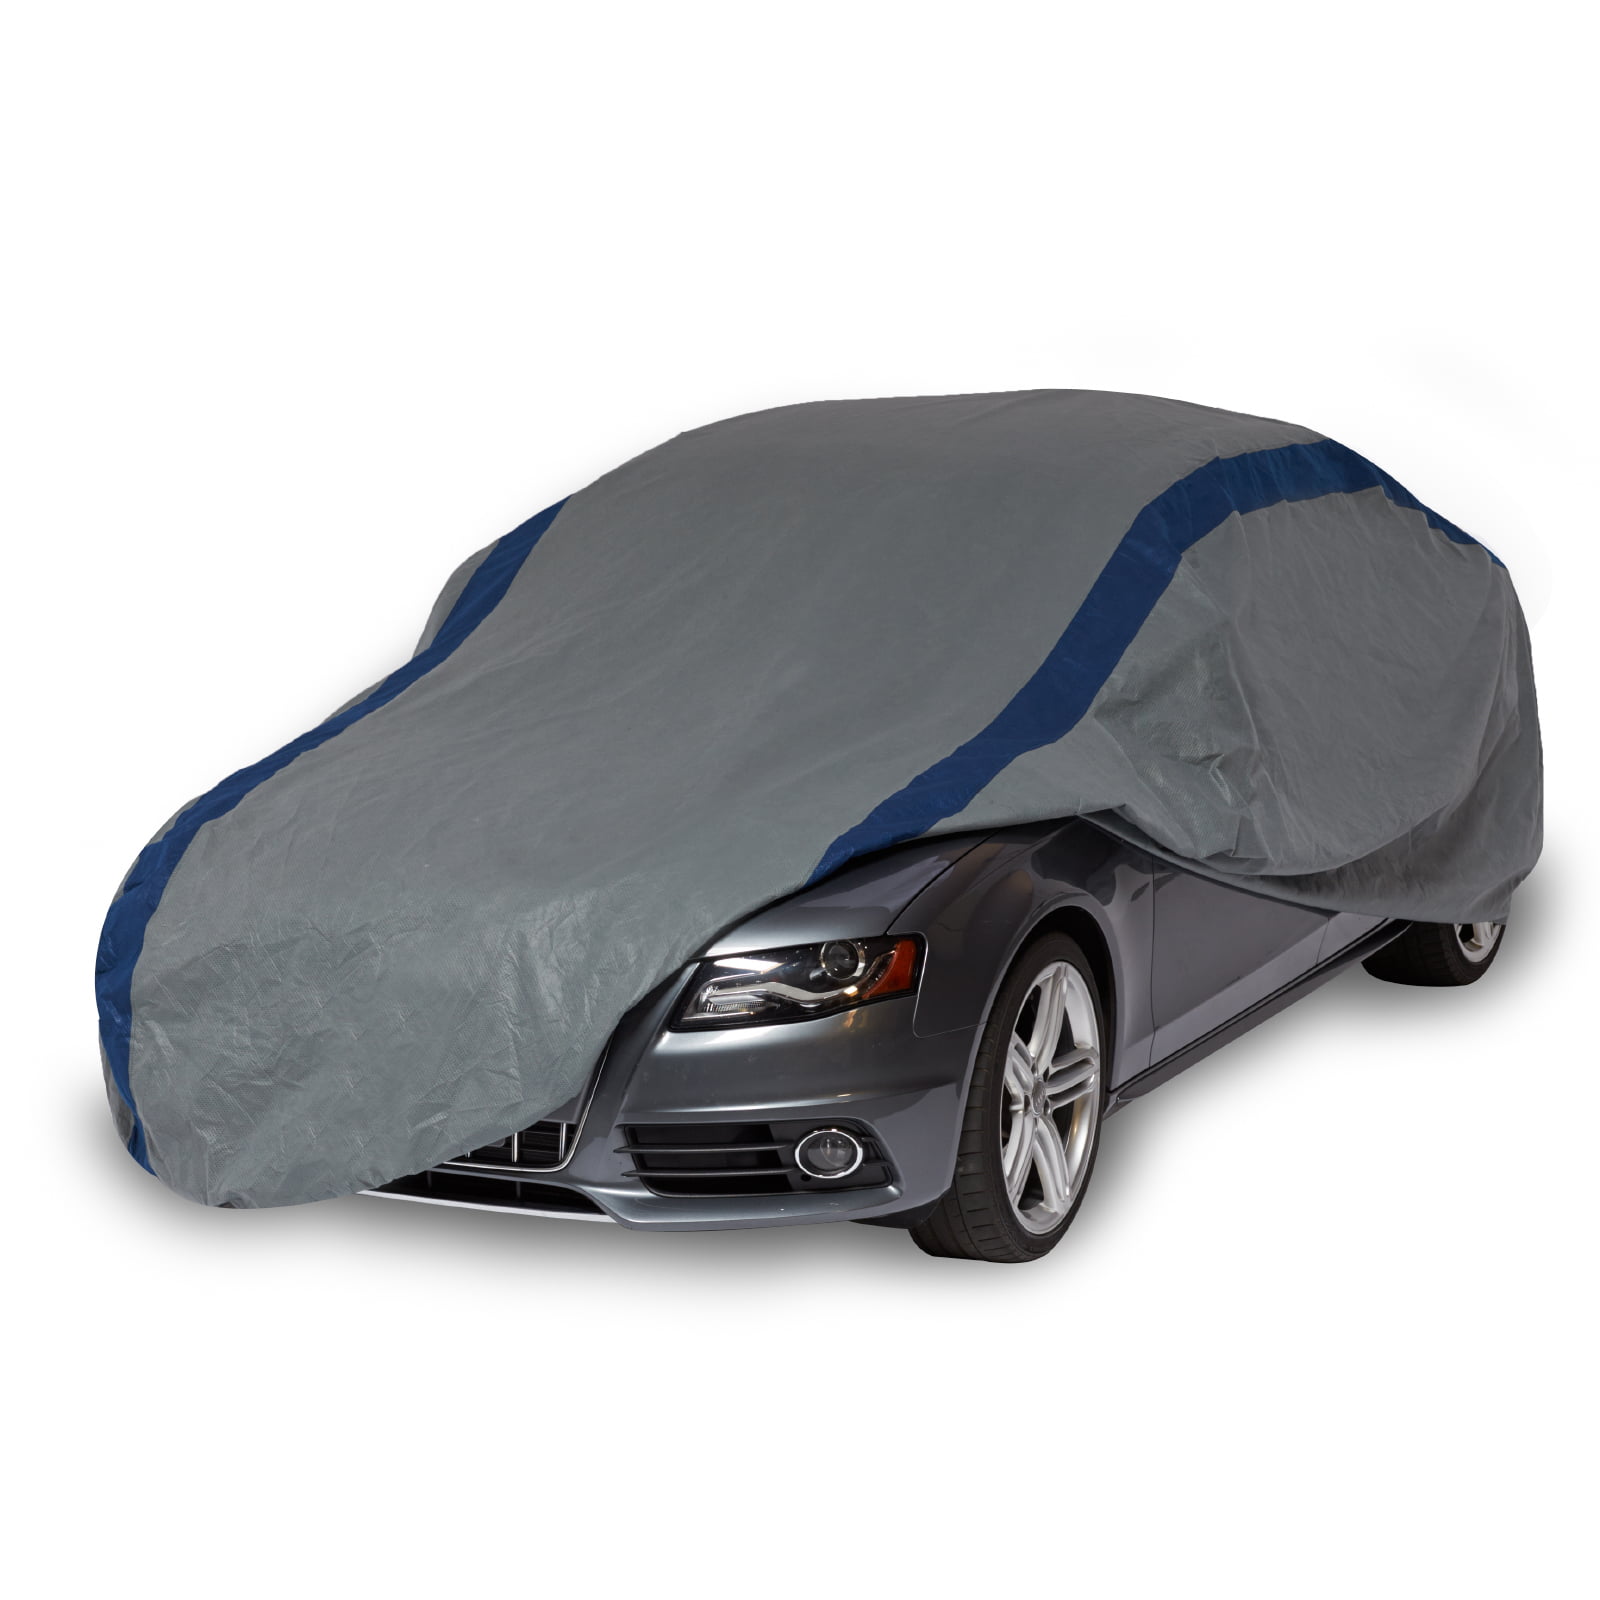 D-2 Budge Duro Car Cover Fits Sedans up to 170 inches Polypropylene, Gray 